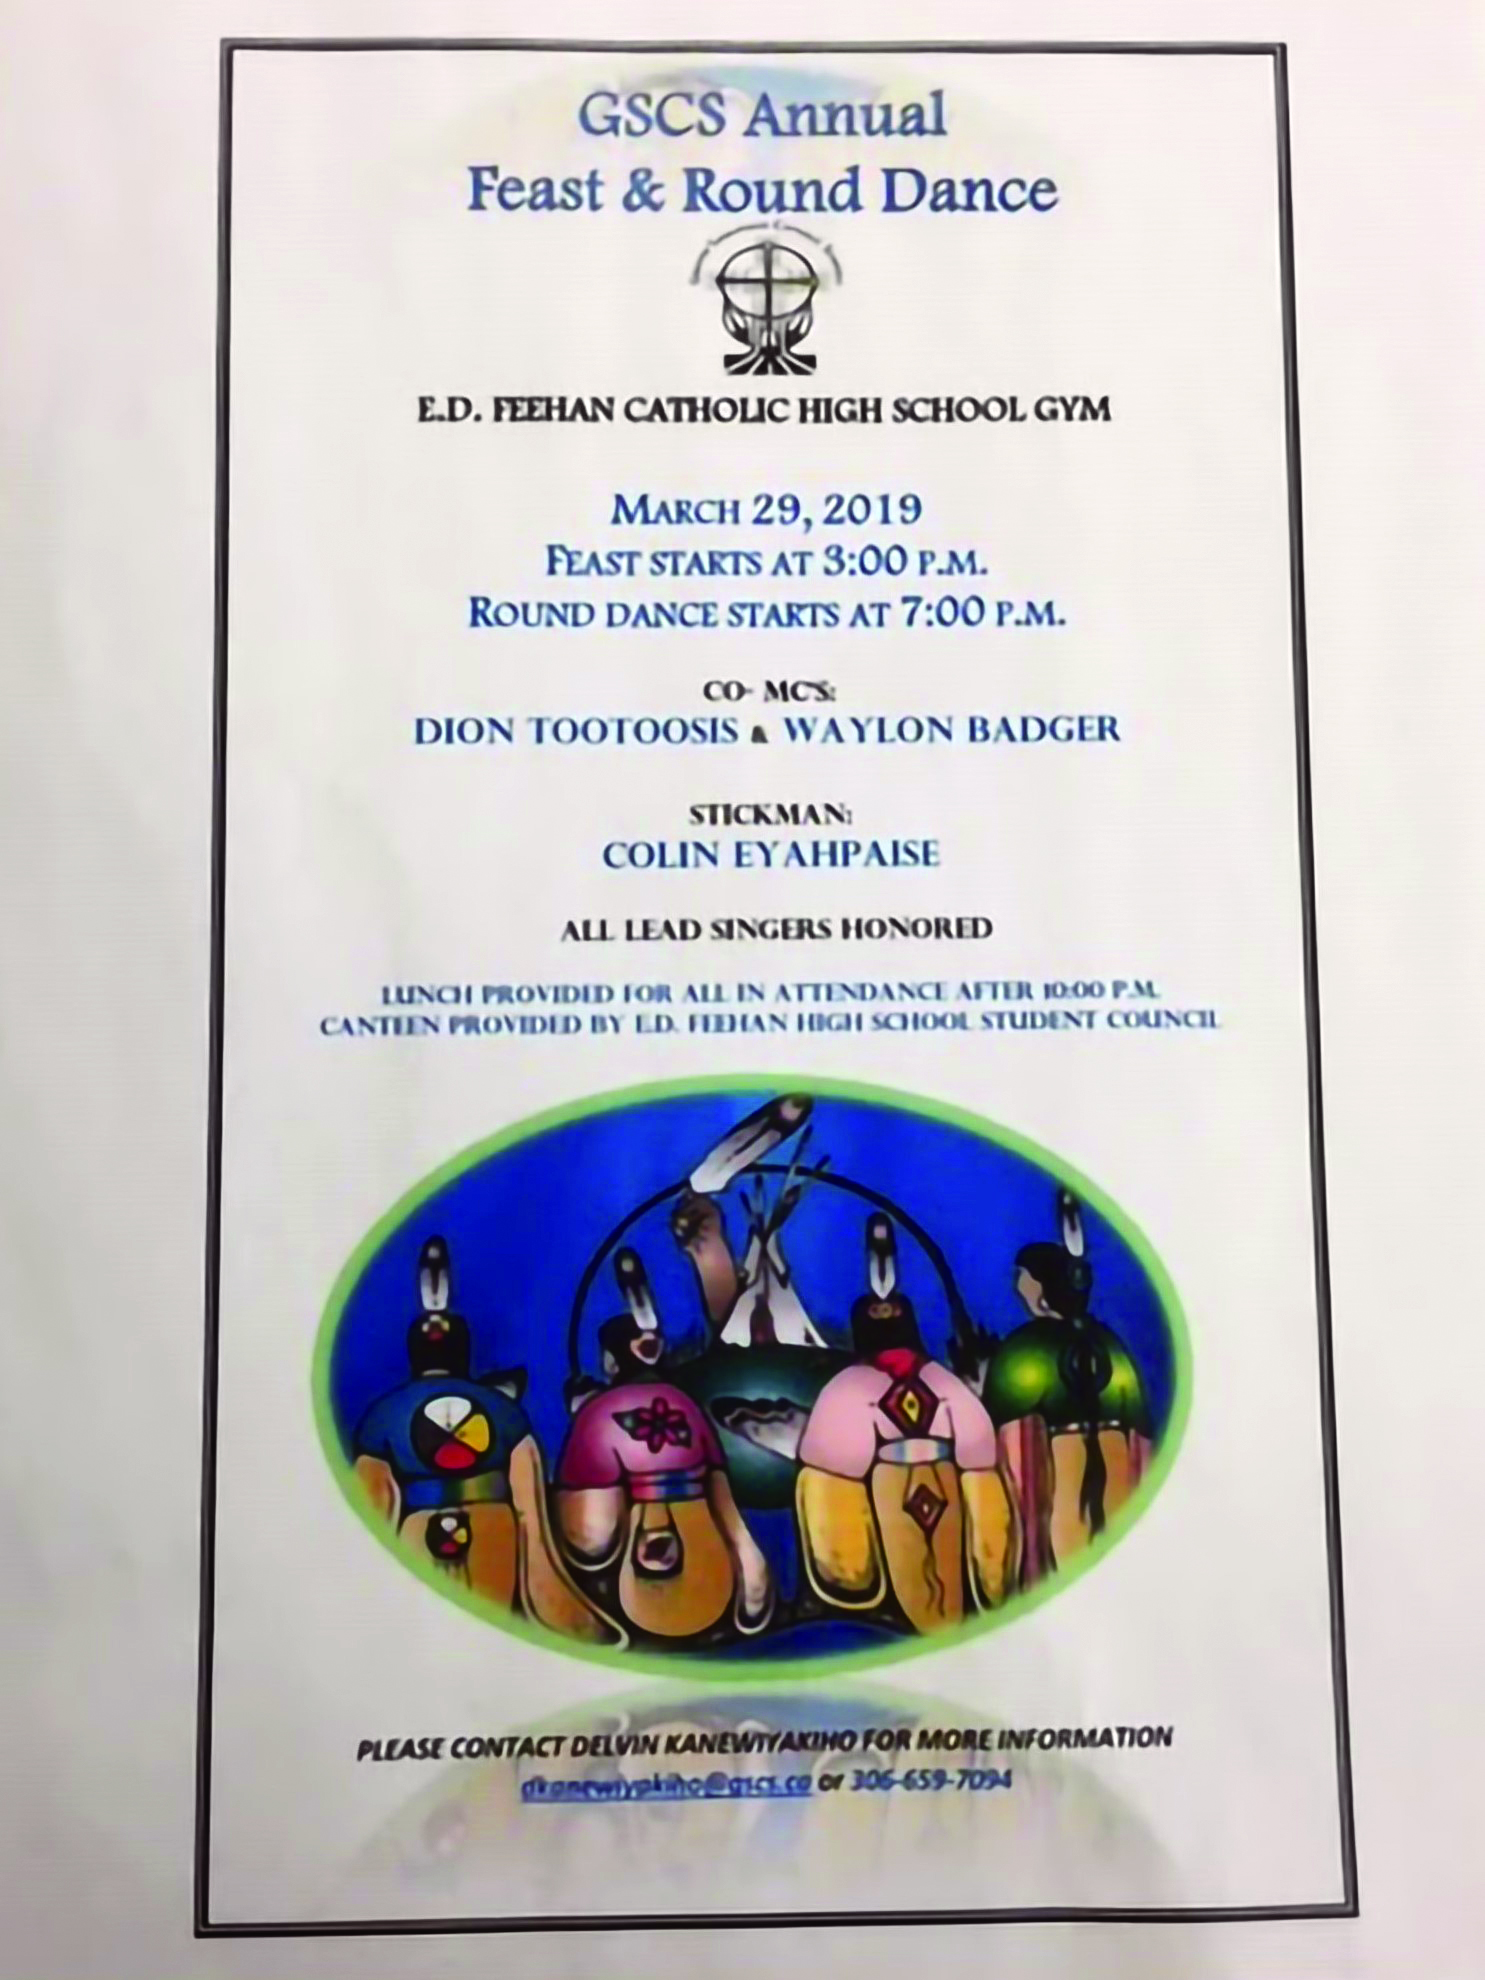 Holy Cross School Feast and Round Dance Flyer